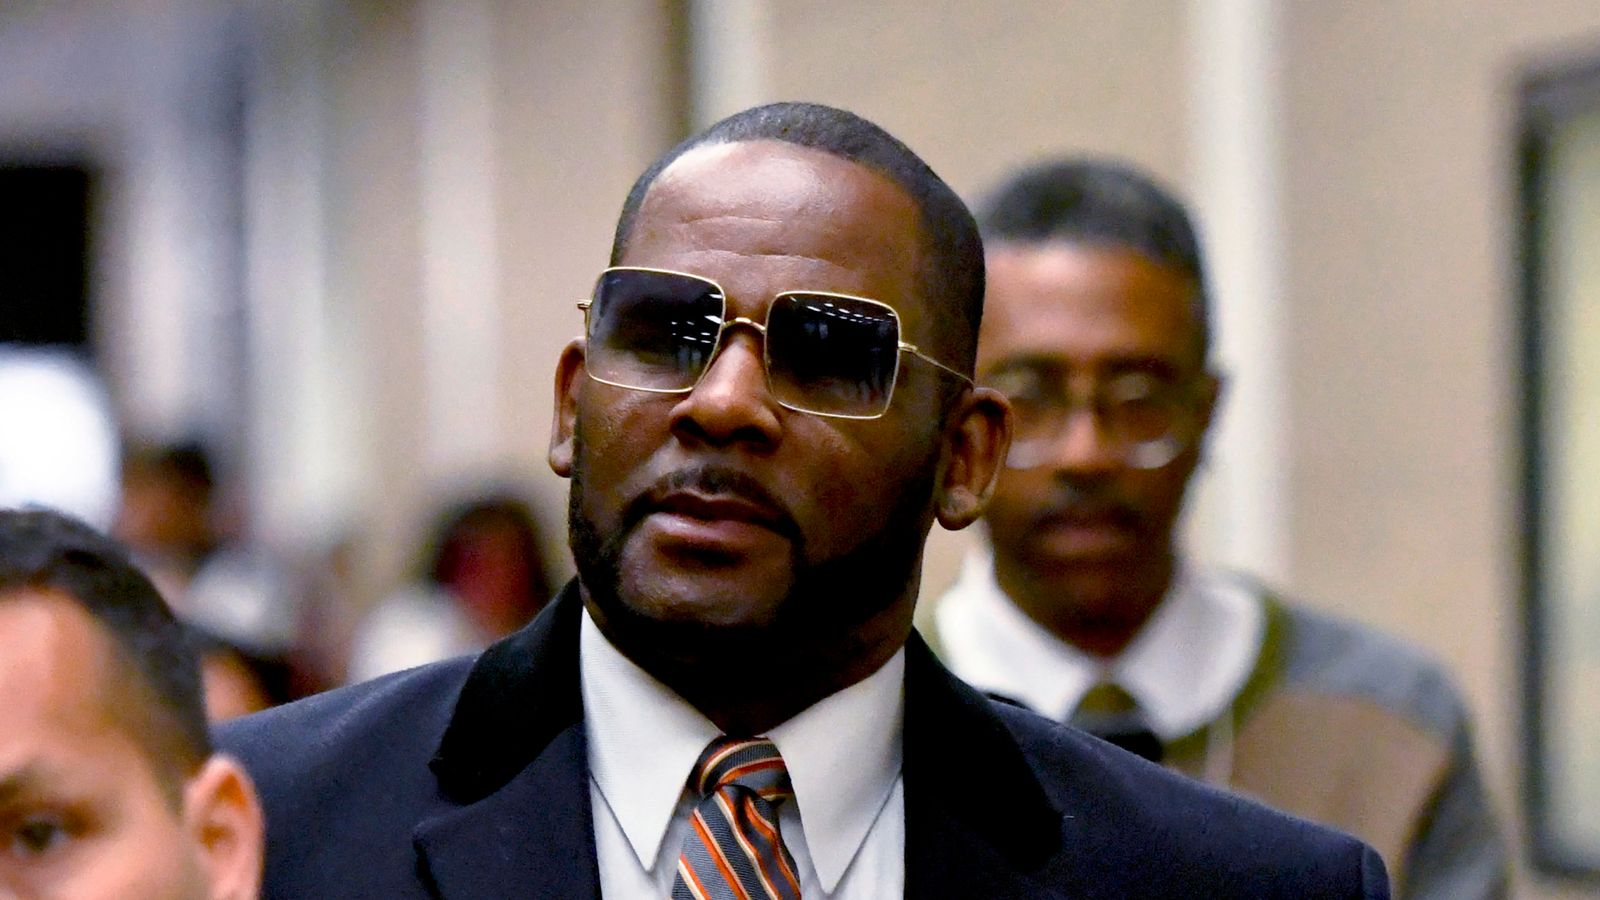 R Kelly to serve additional one year in prison after conviction on federal charges